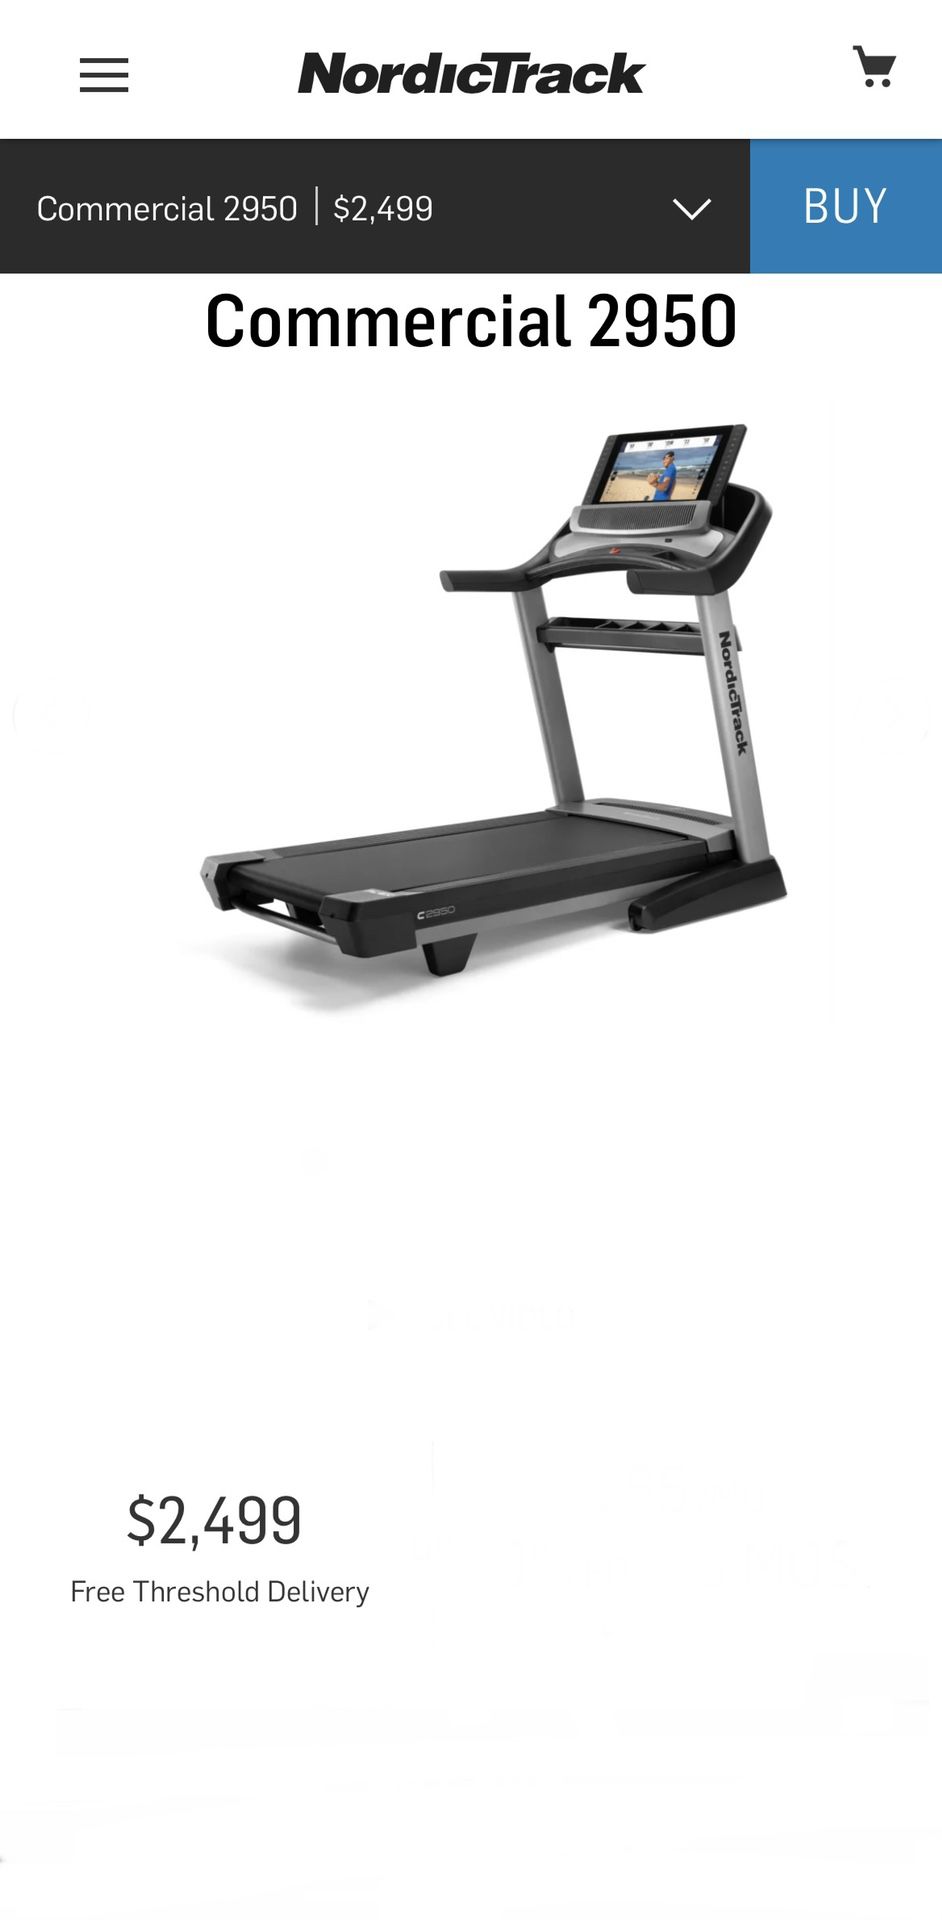 Brand New 2021 model NordicTrack Commercial 2950 Incline Treadmill Trainer.